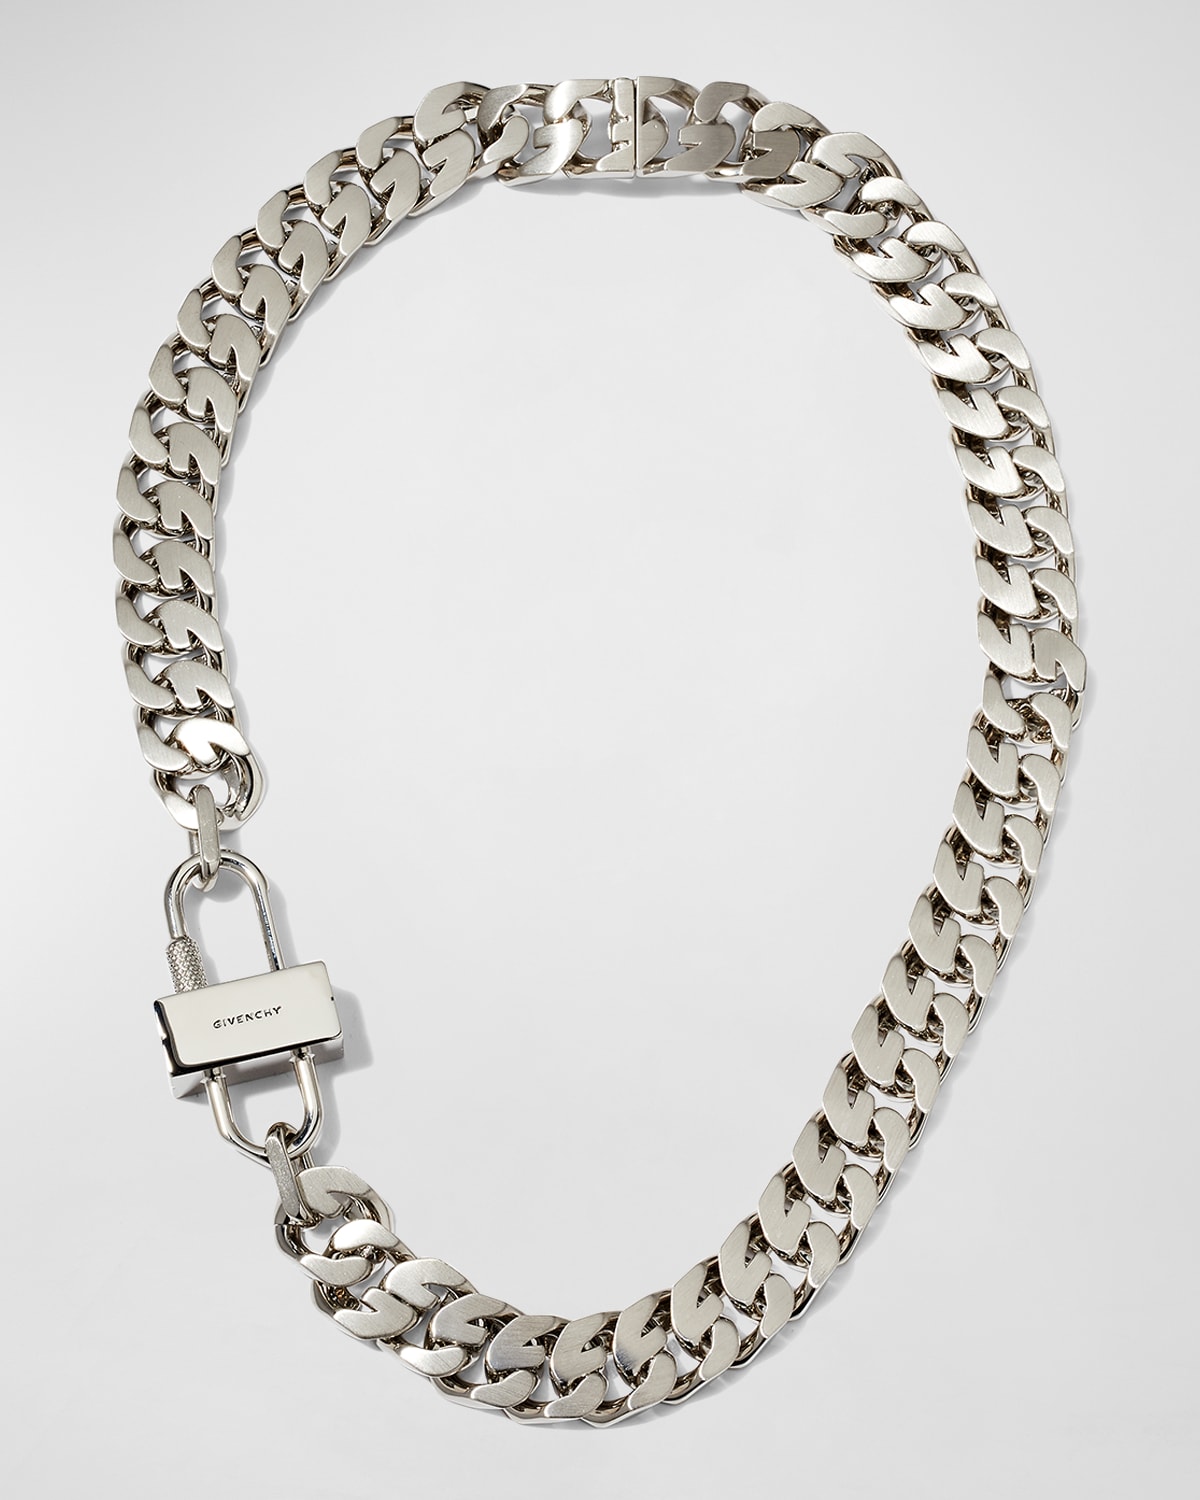 Givenchy Men's Lock G-Chain Necklace